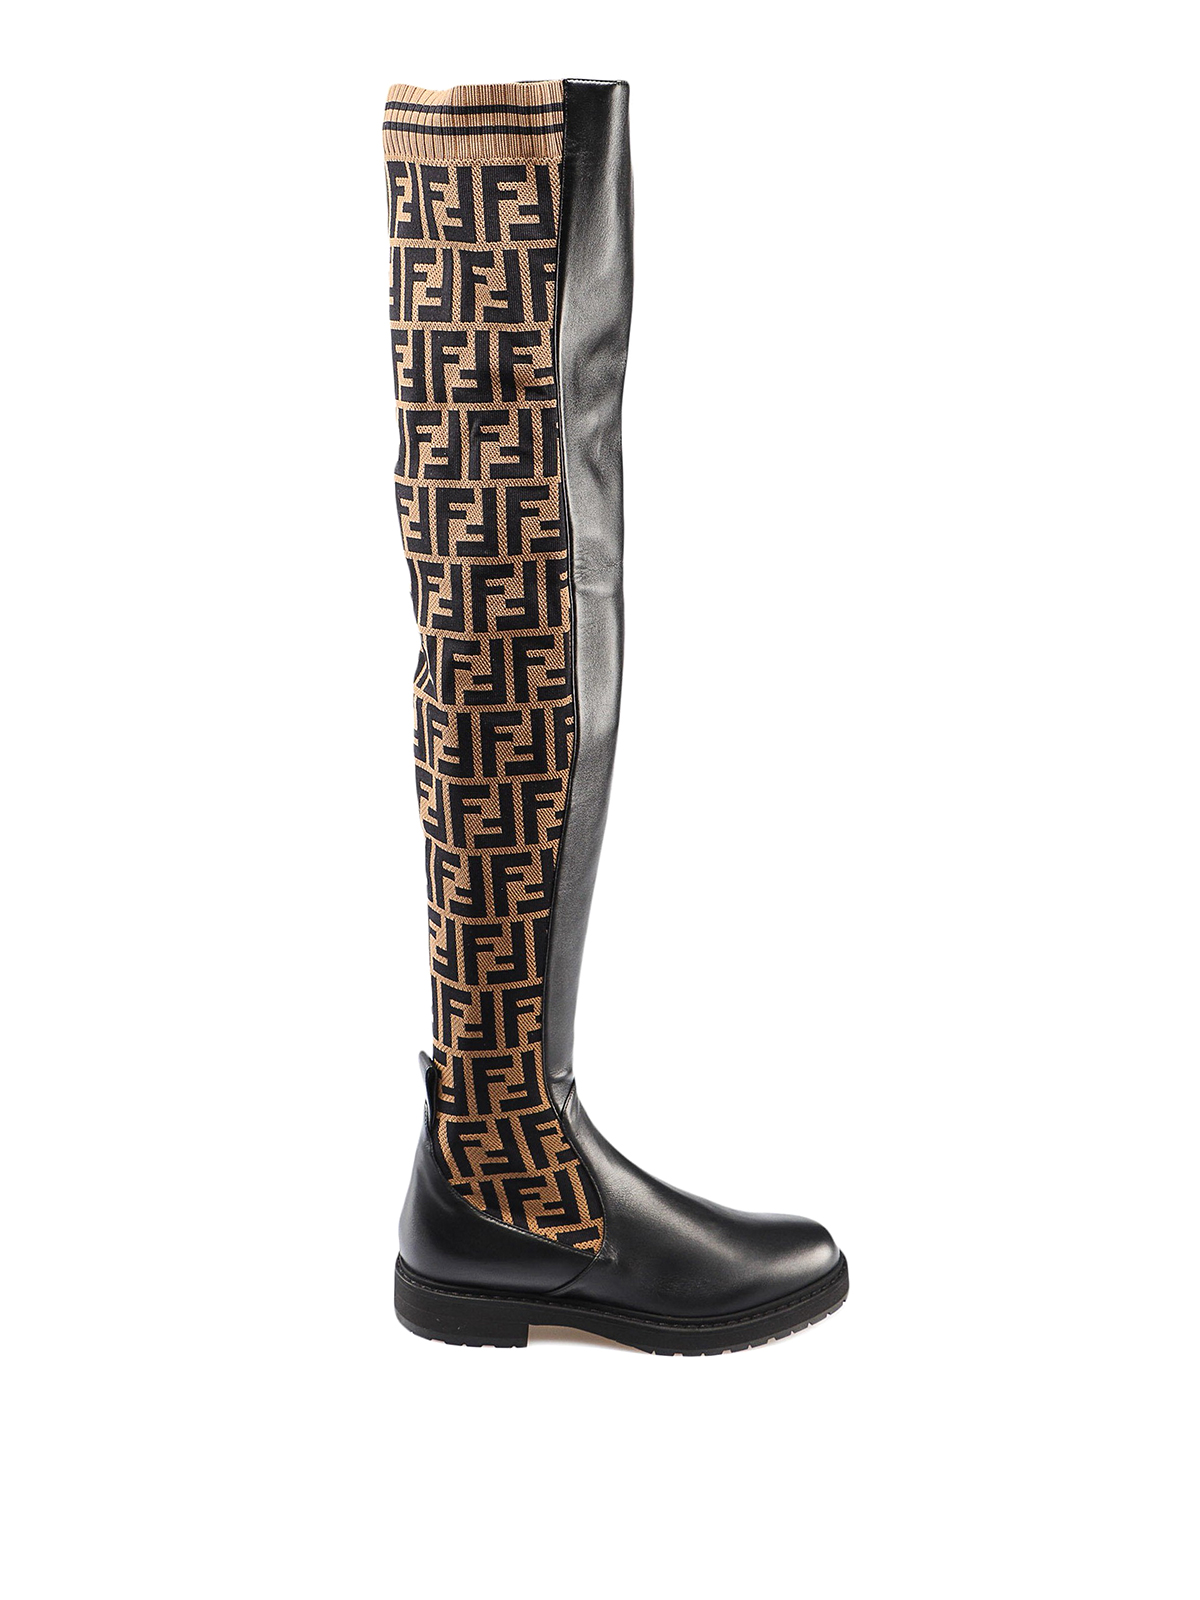 fendi boots over the knee